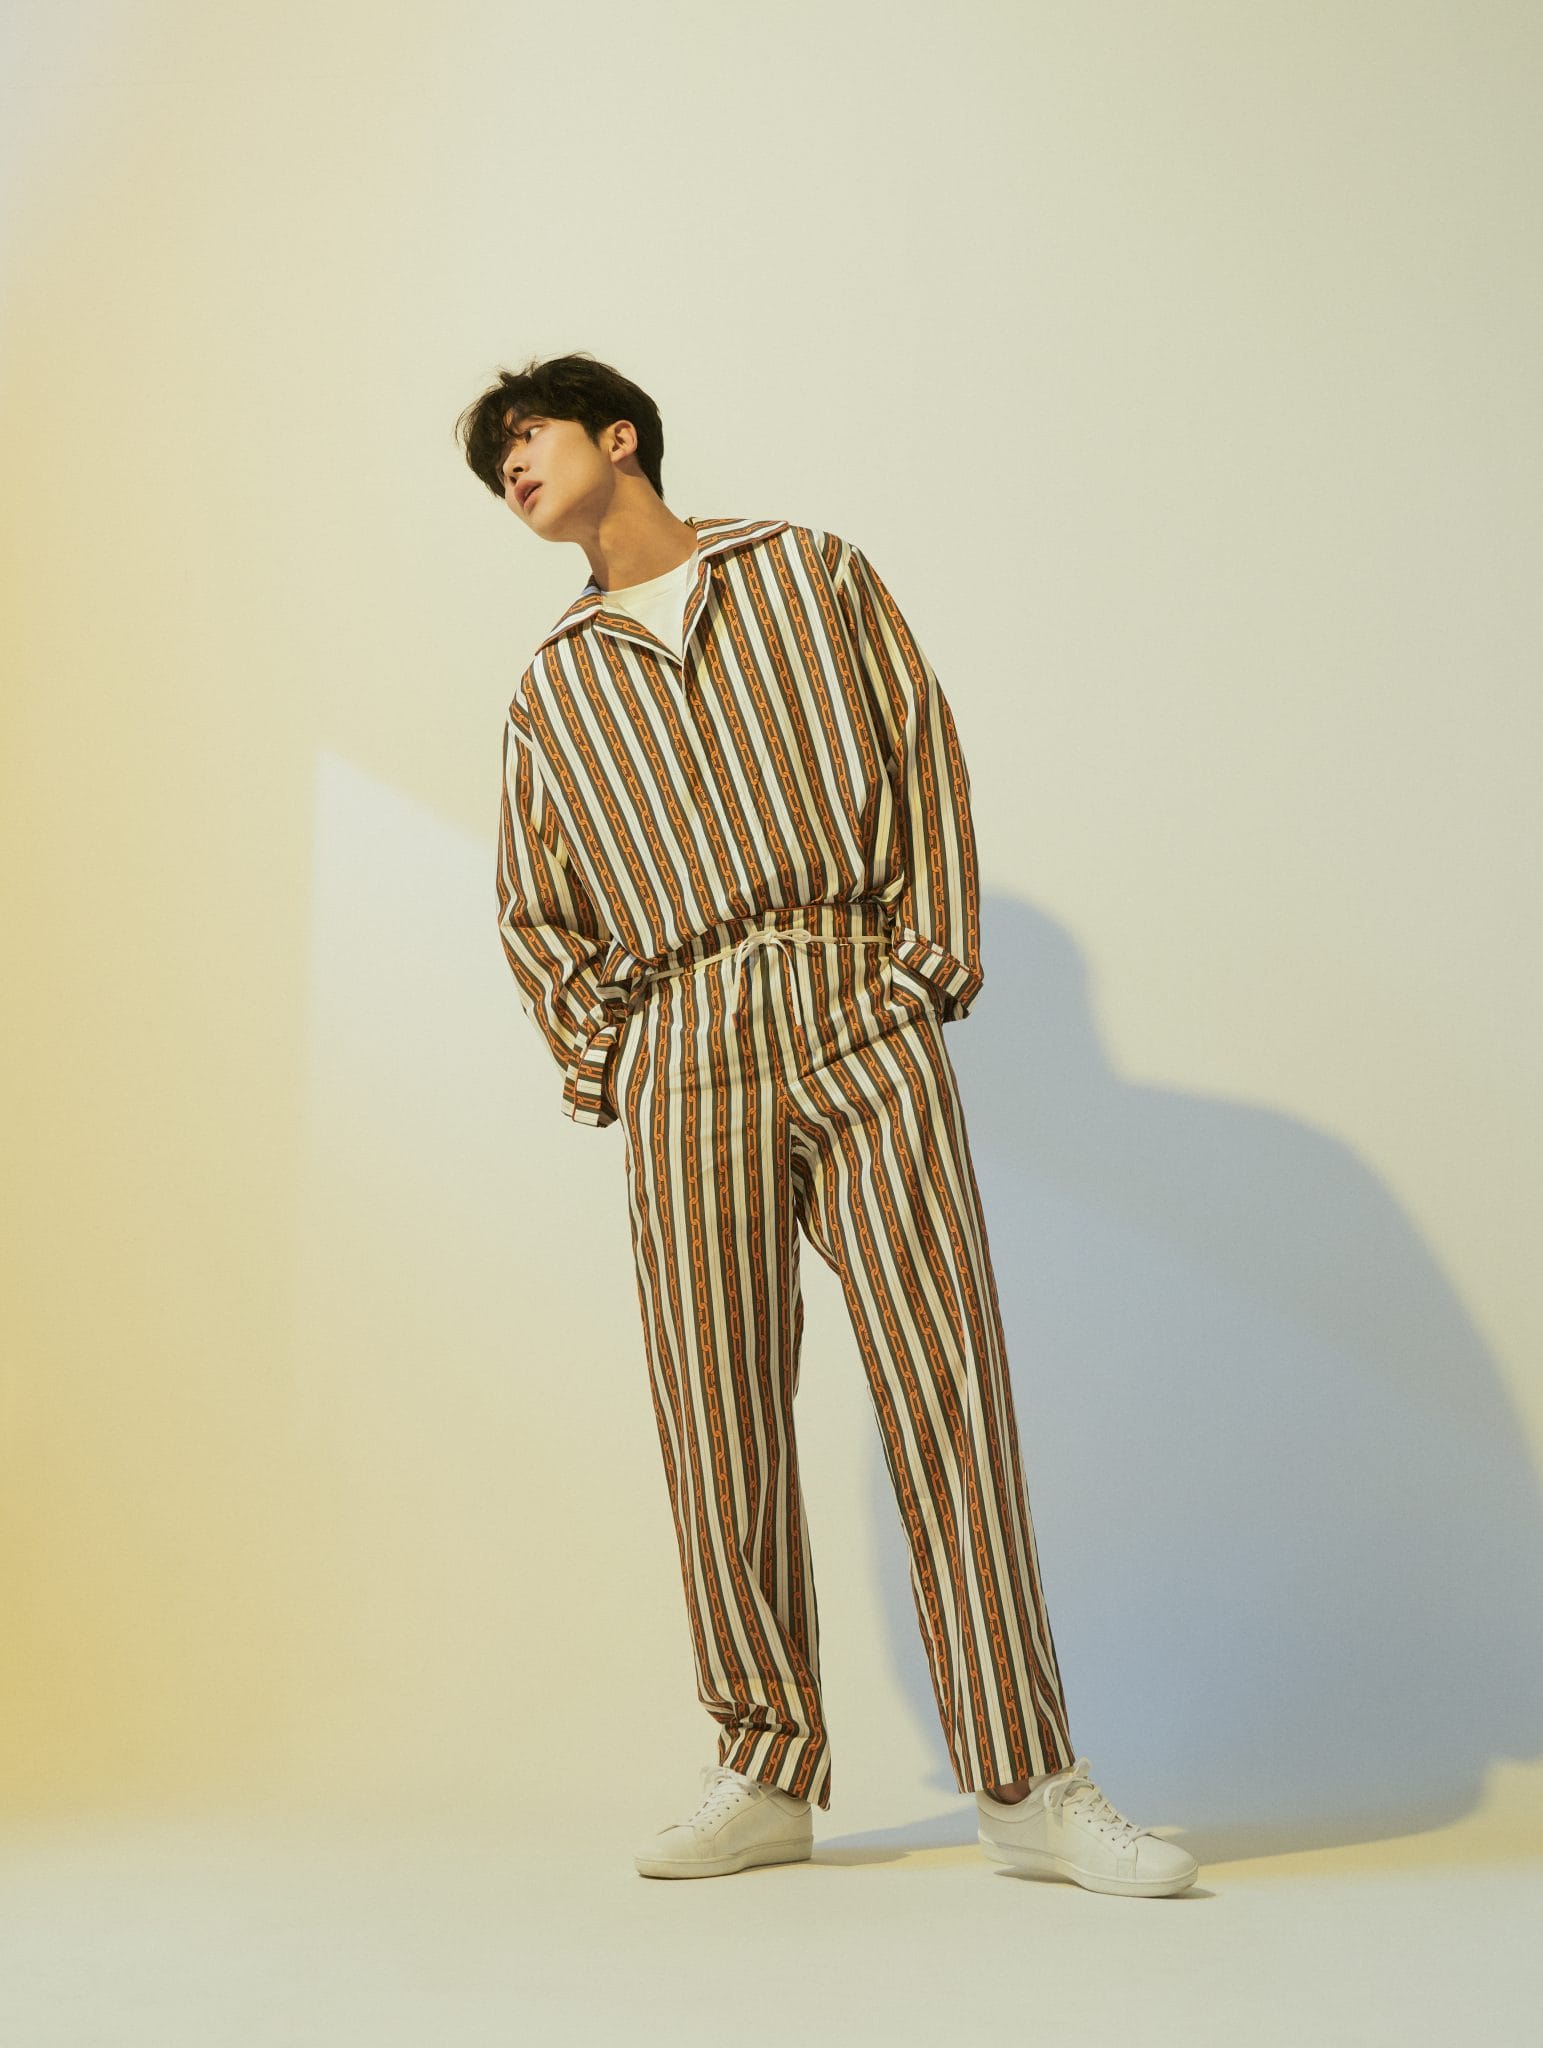 Fire Burning — Ro Woon from SF9 In Our June/July'19 Issue - Men's Folio